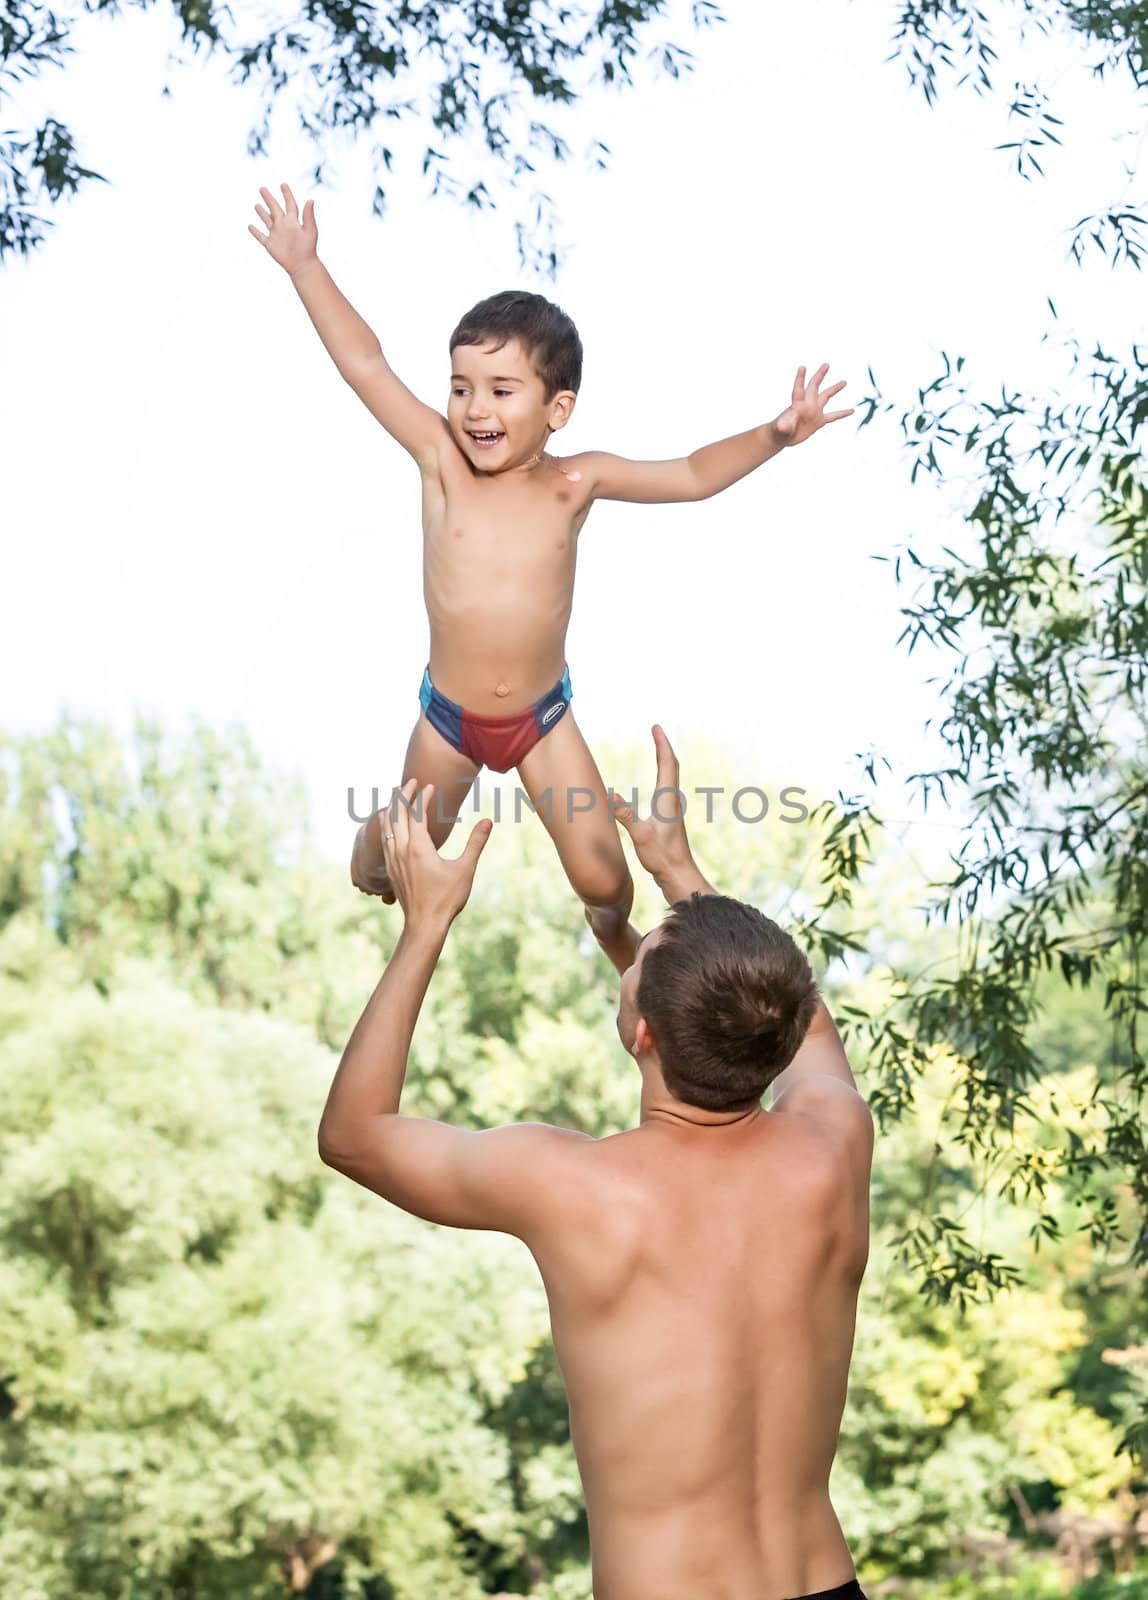 Father throwing his son in the air and catching him